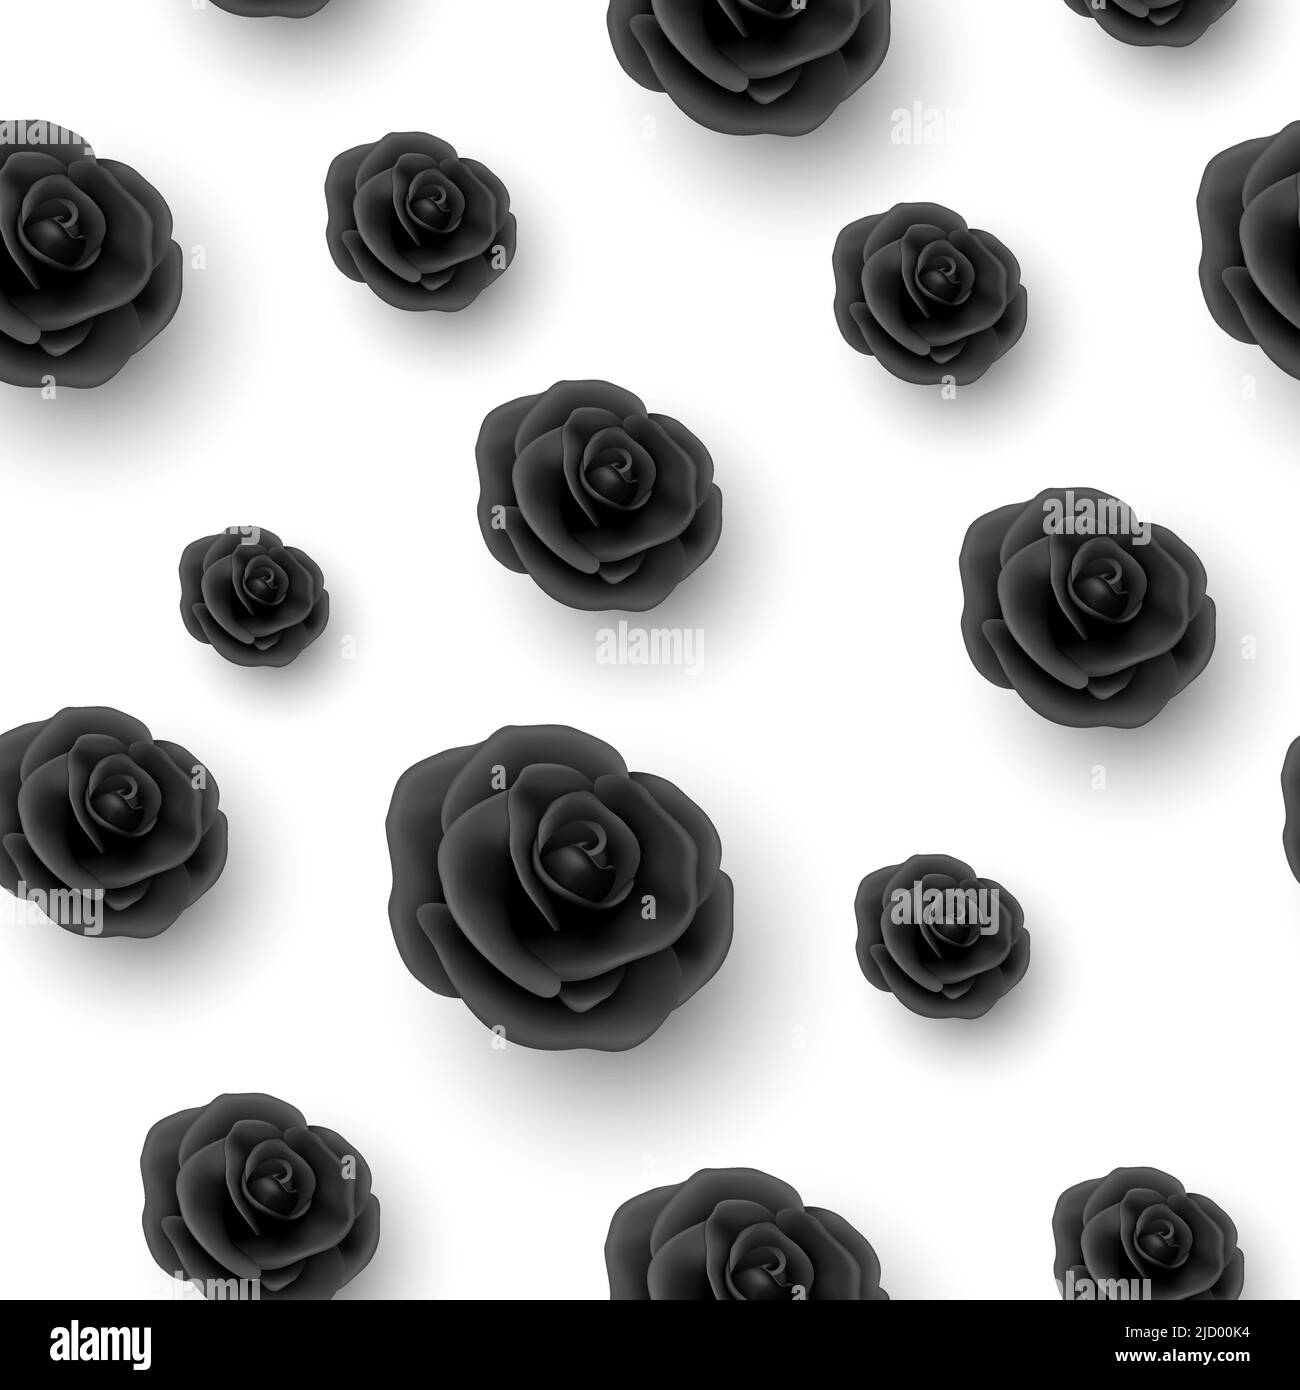 Realistic rose Black and White Stock Photos & Images - Alamy